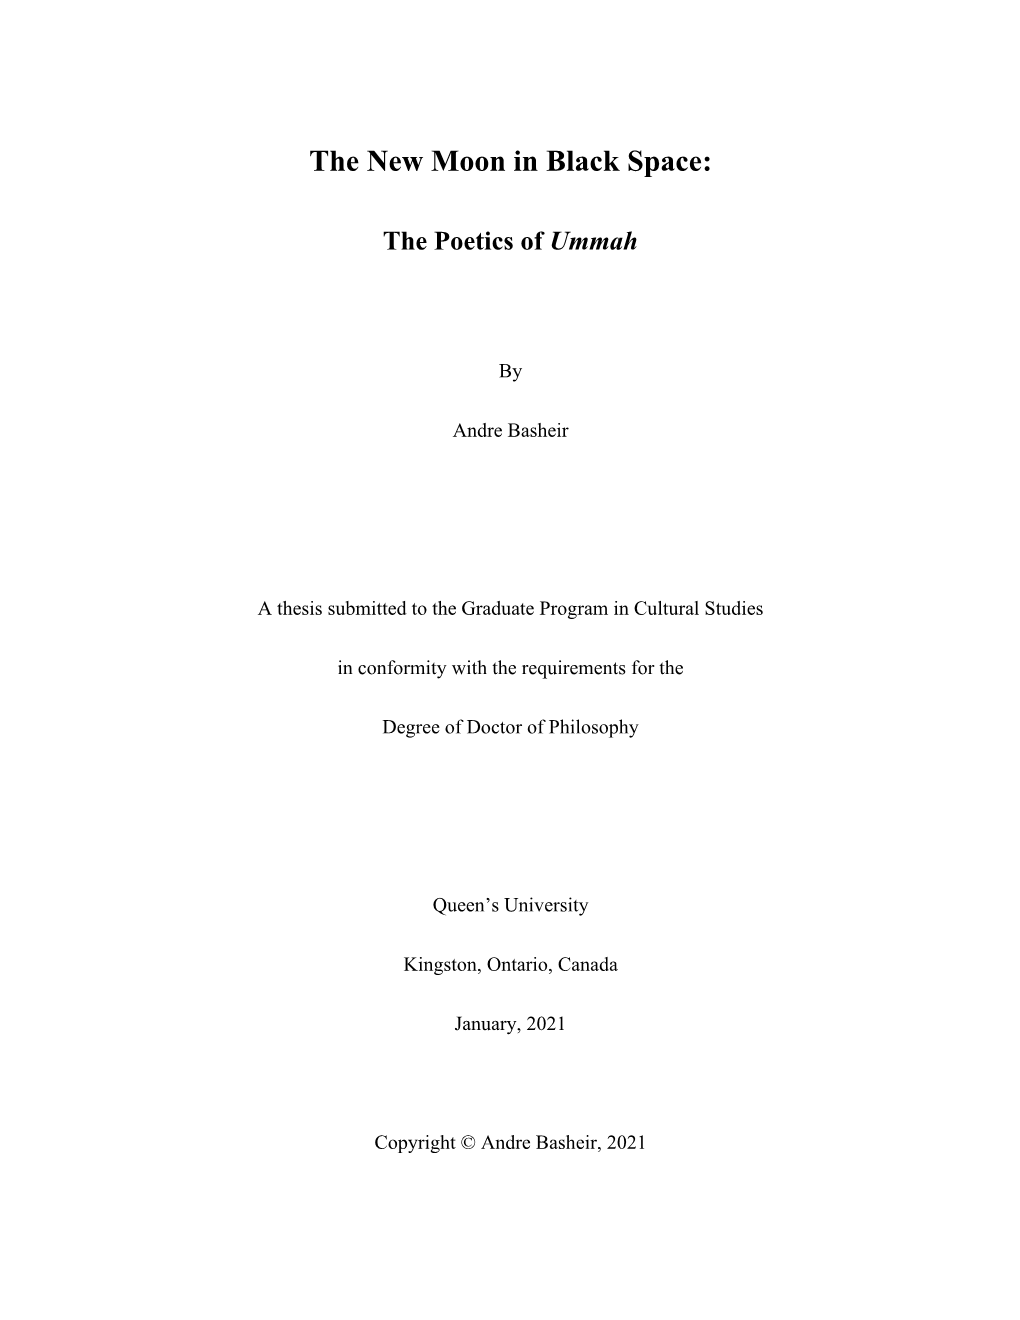 The New Moon in Black Space